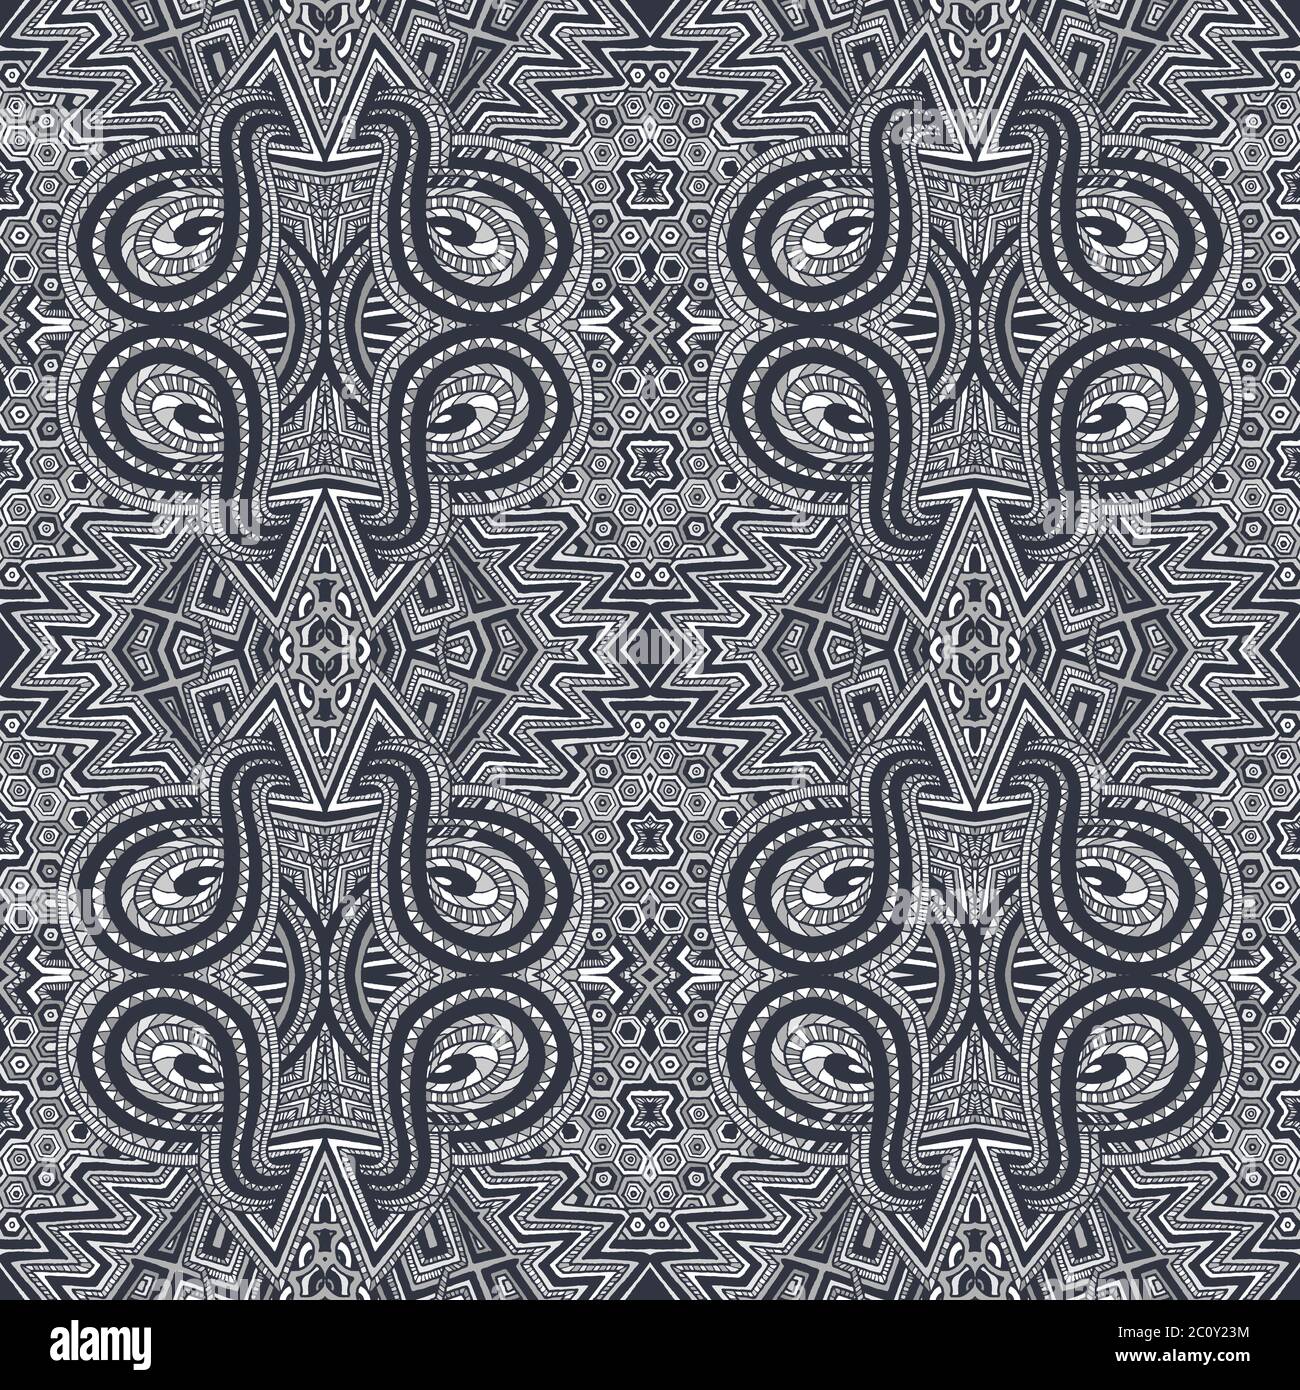 gray hand drawn psychedelic zentangle pattern Stock Photo